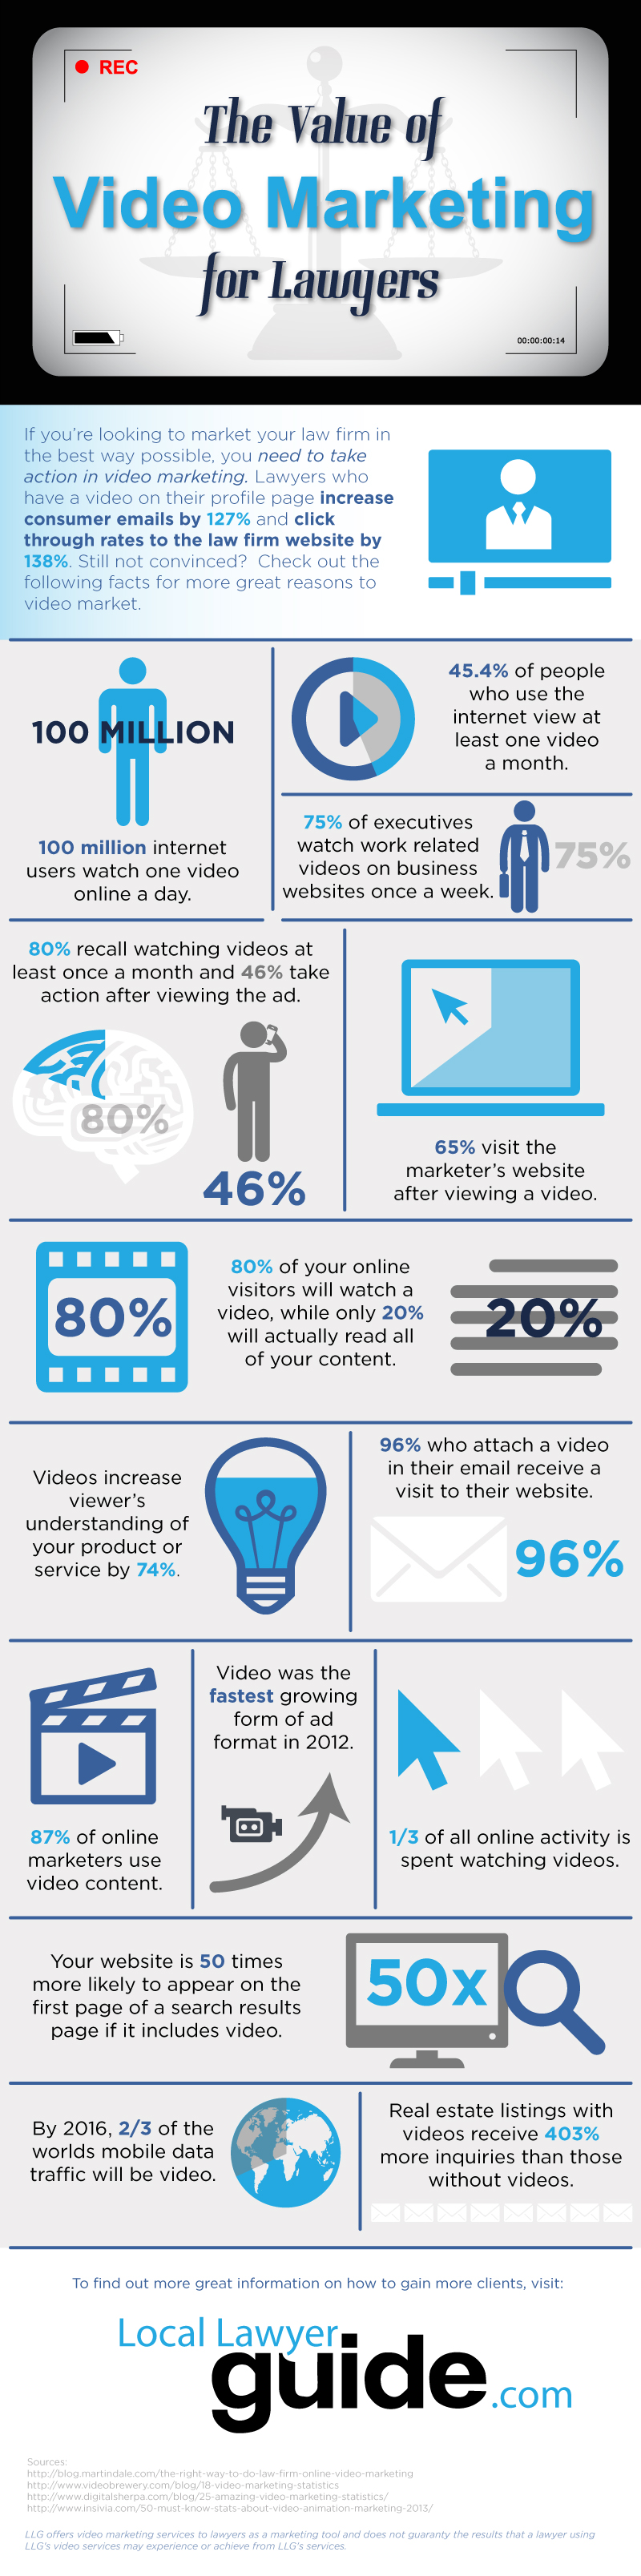 The Value of Video Marketing For Lawyers